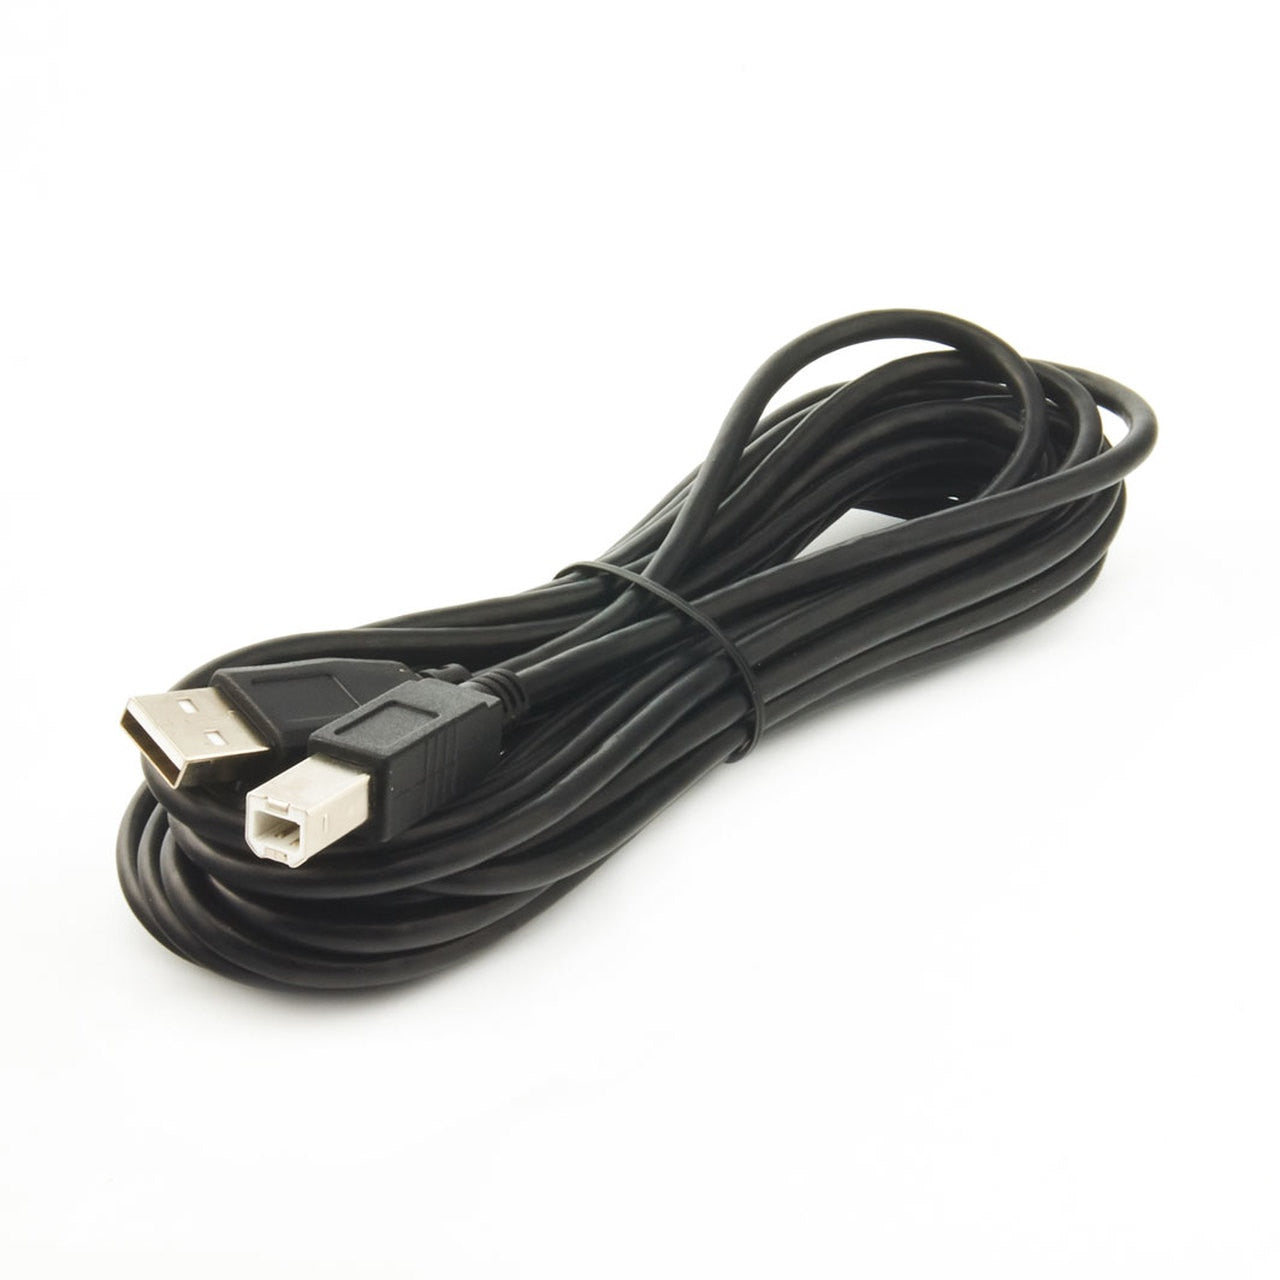 Usb A Male To B Male Cable 16 Foot 49 Meter Elmwood Electronics 0908